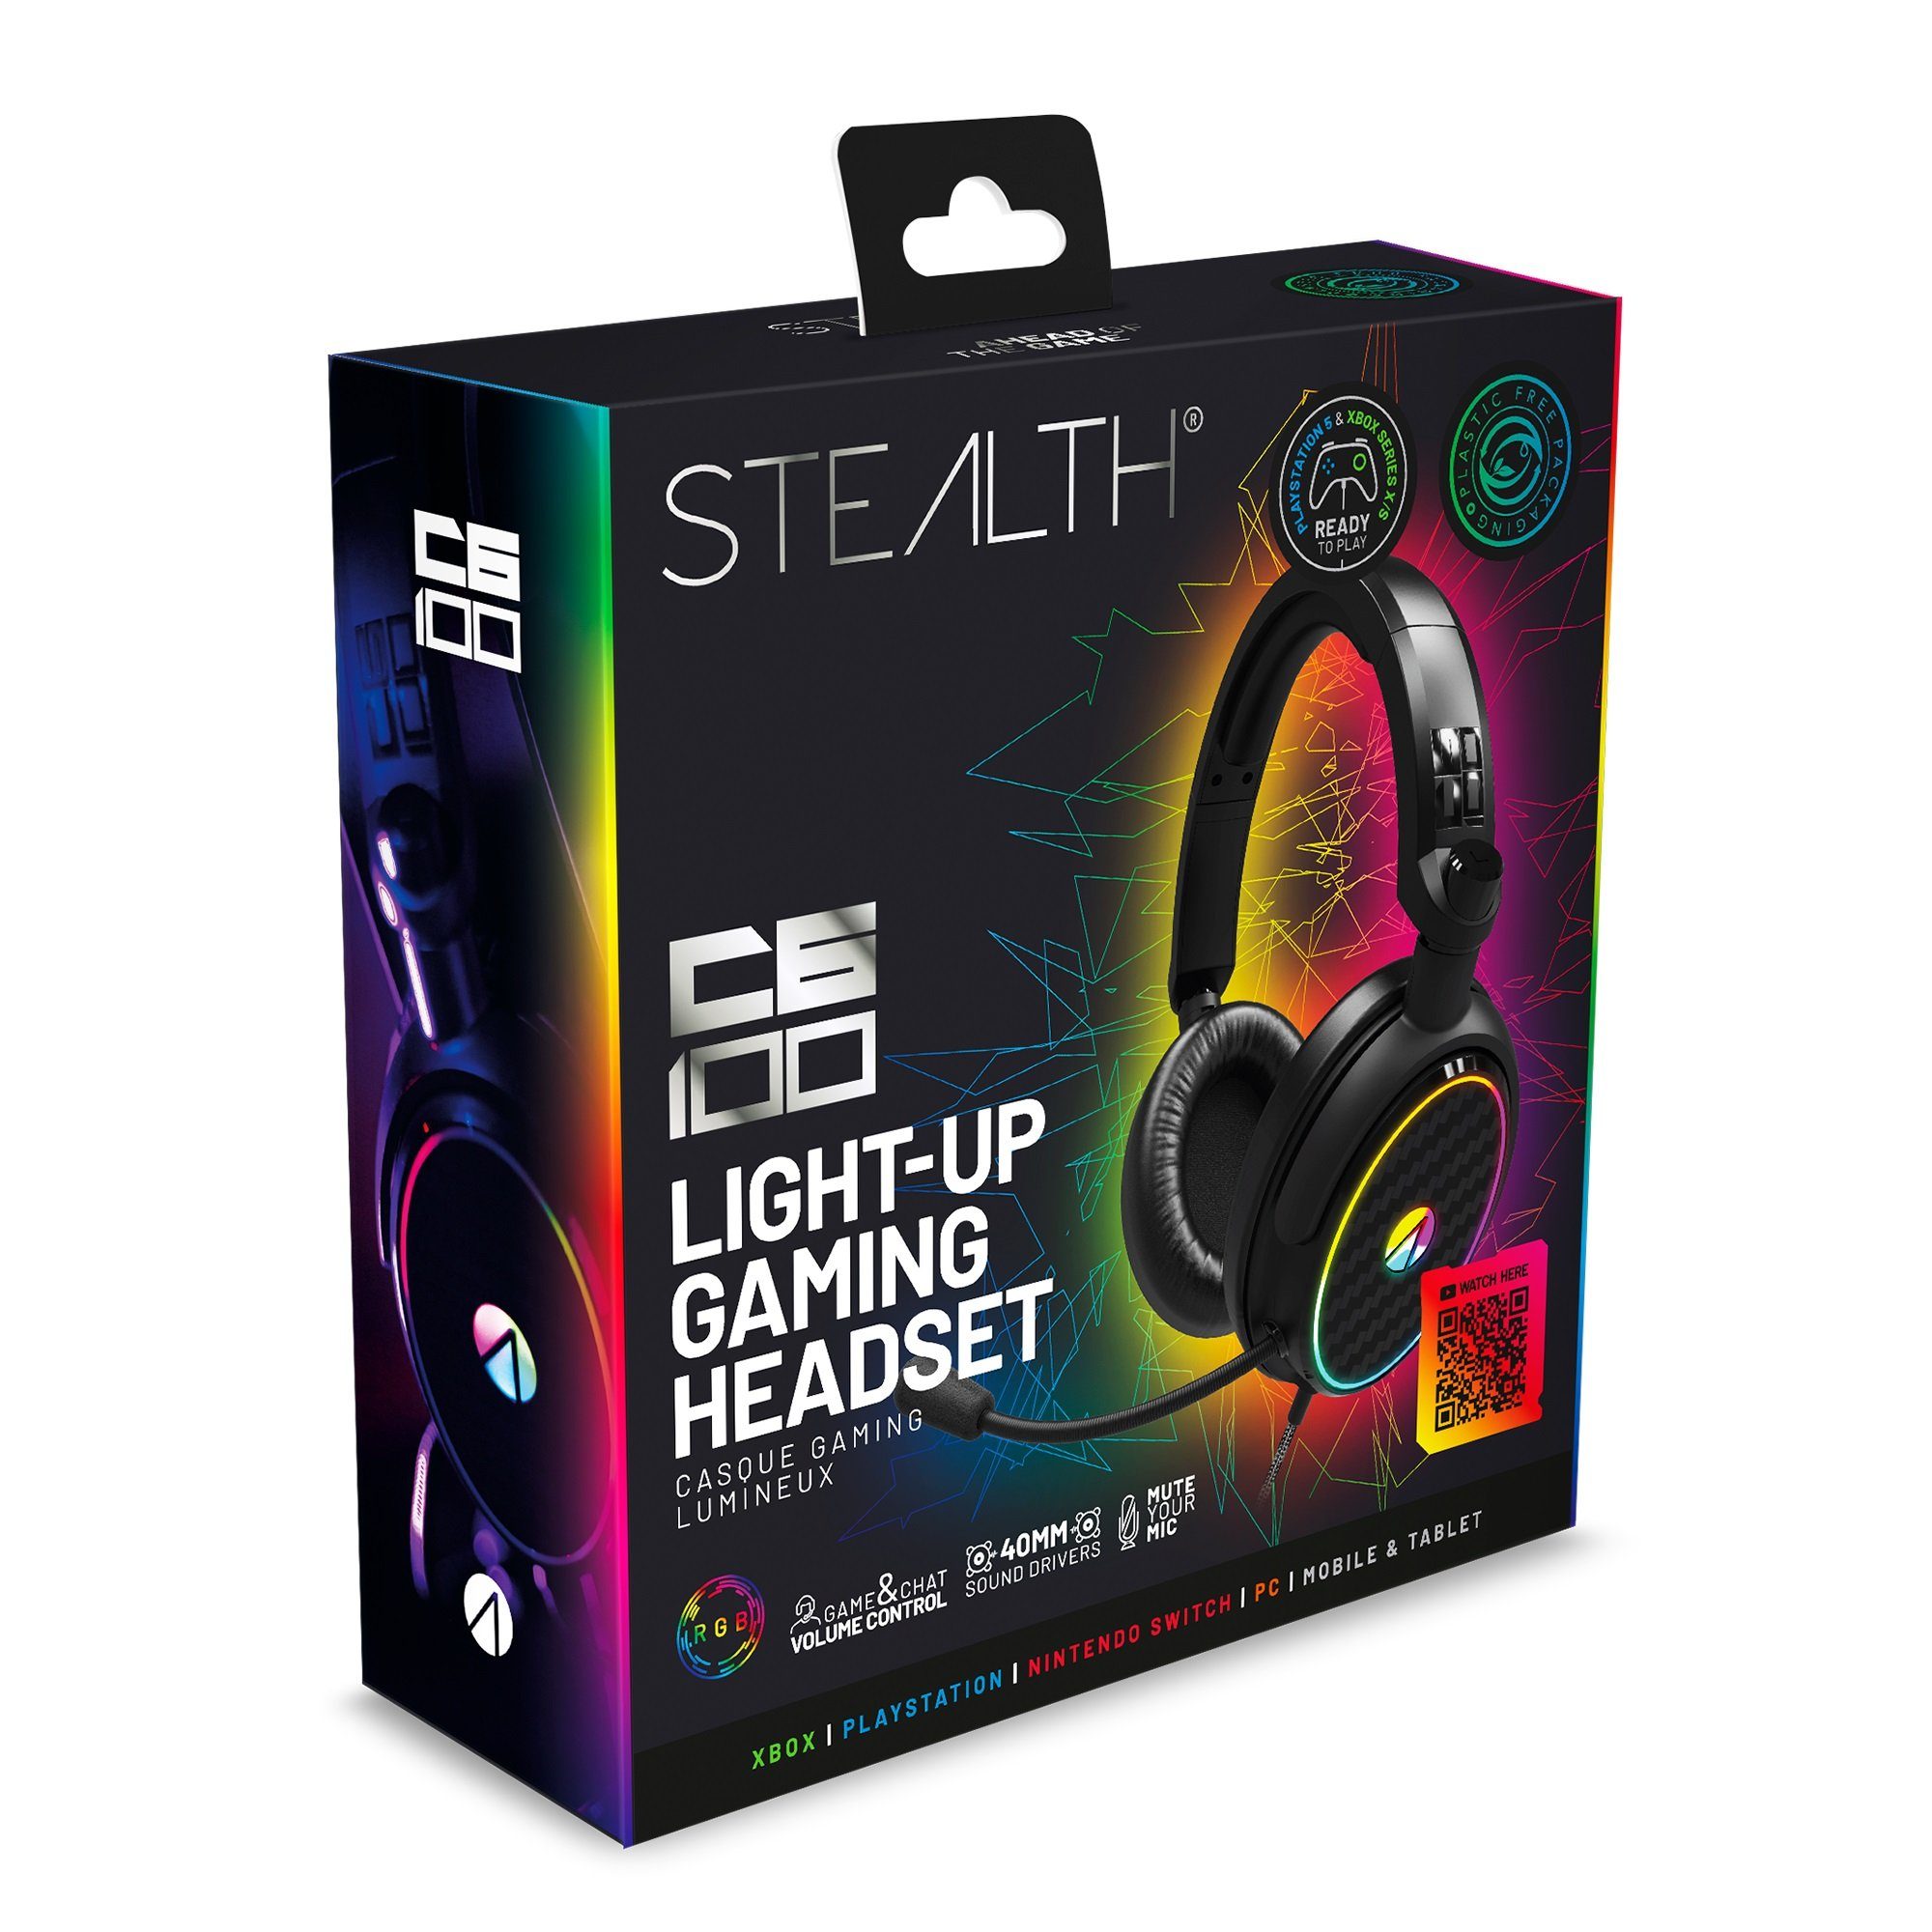 Stealth Stereo Gaming Headset C6-100 Beleuchtung Verpackung) mit LED Gaming-Headset (Plastikfreie